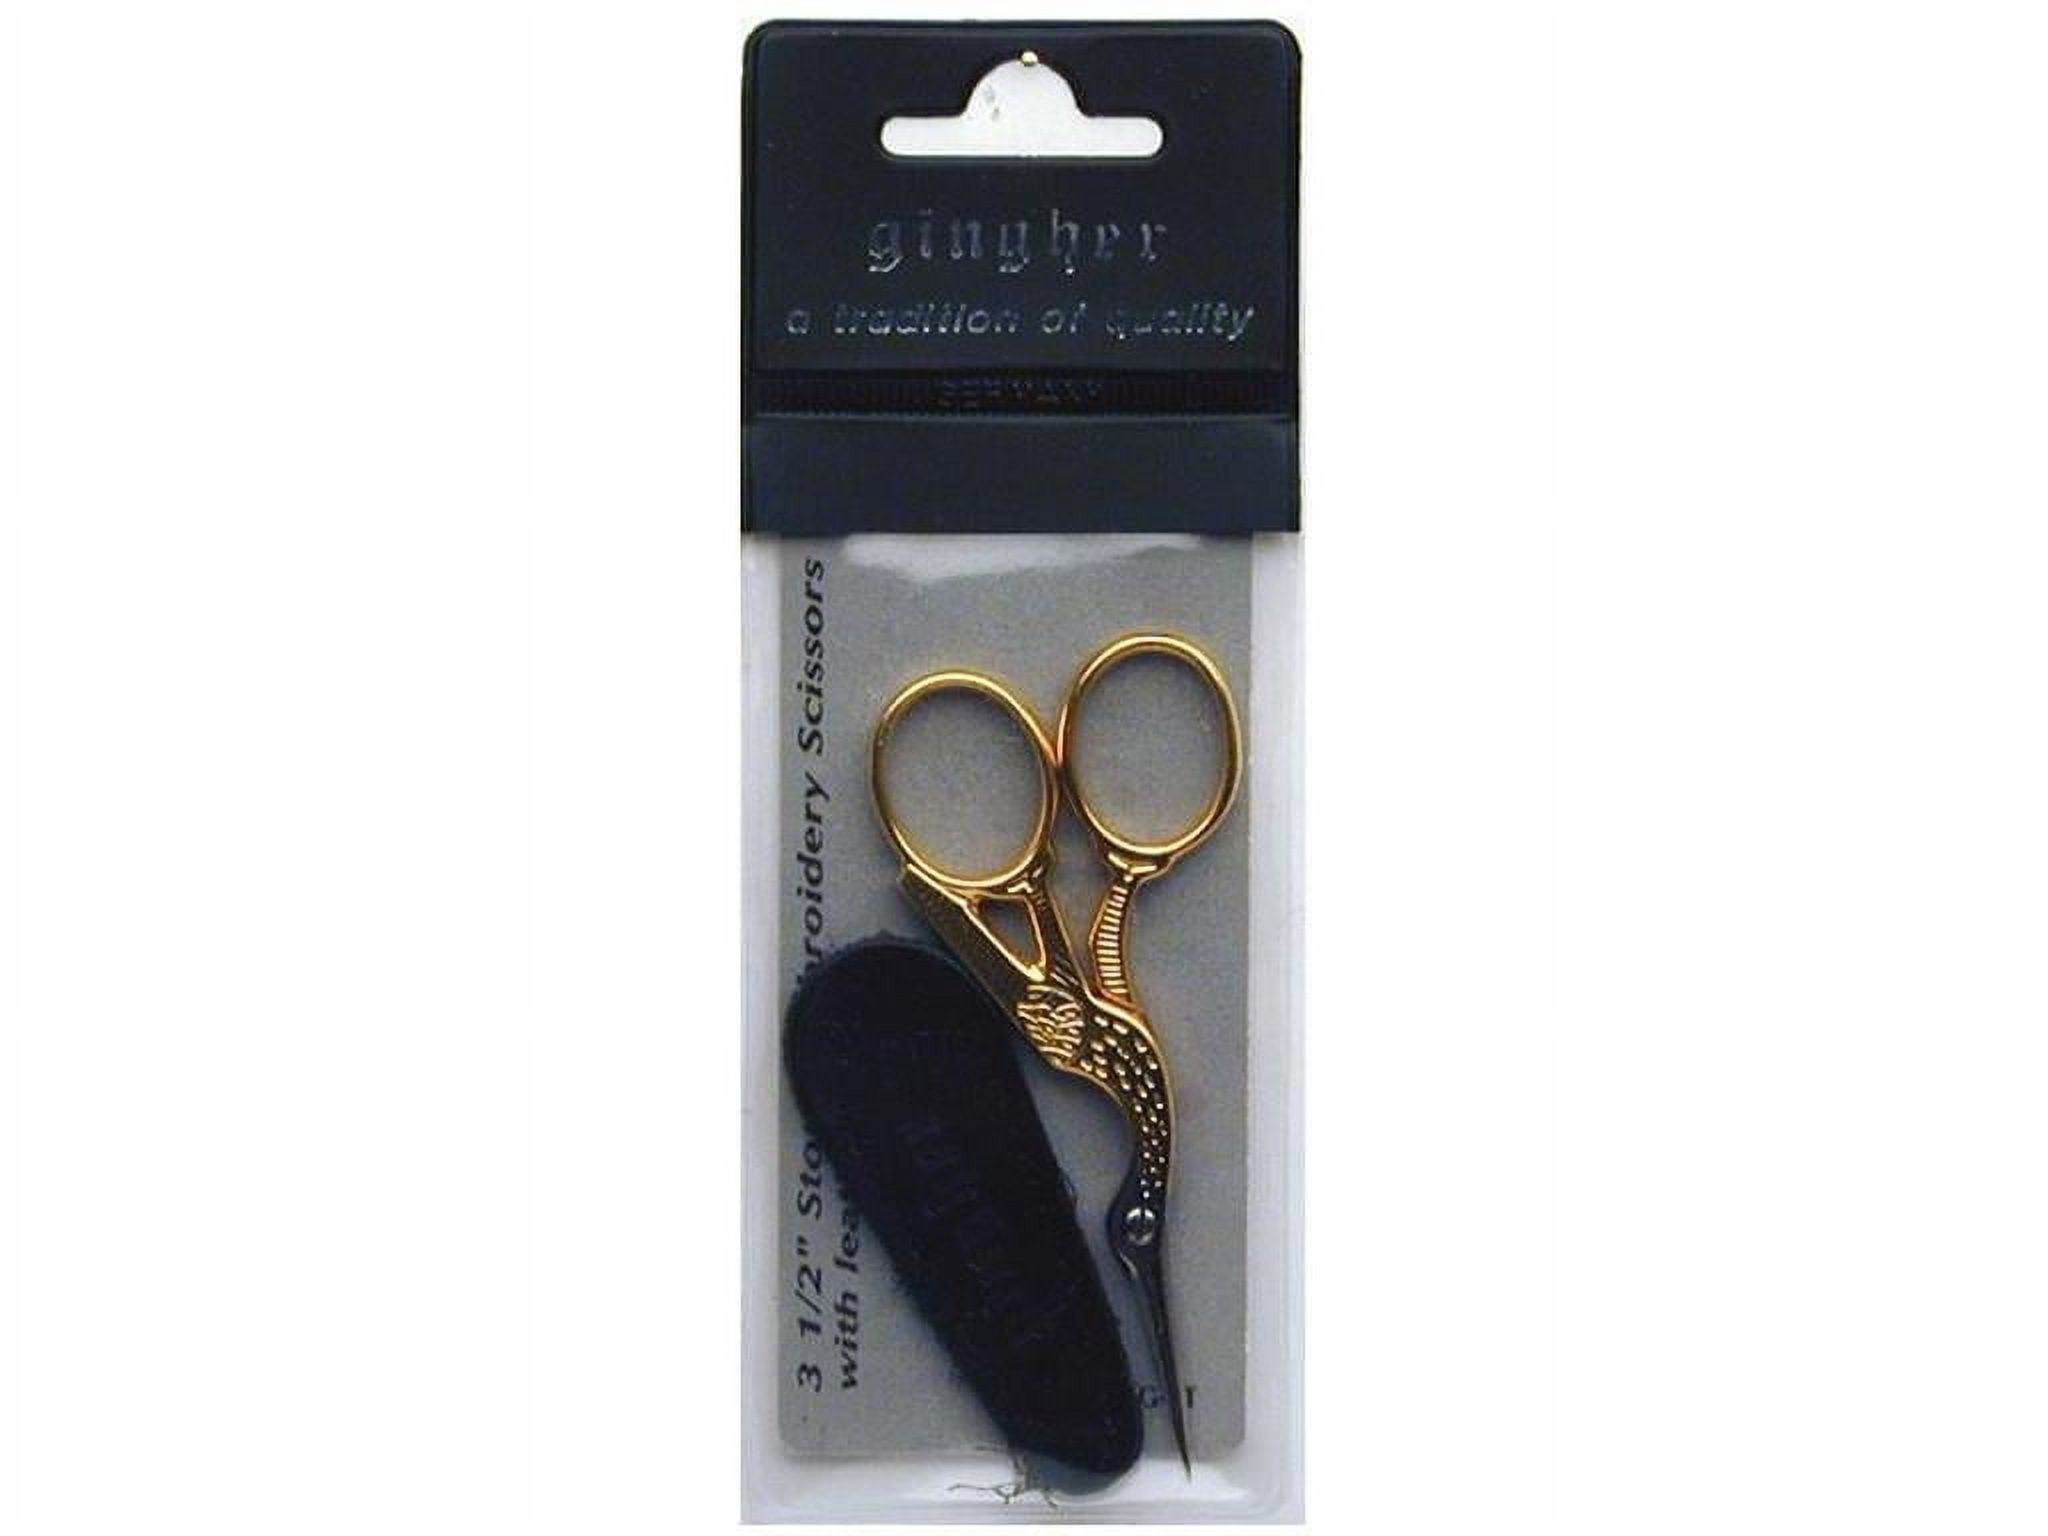 Gingher Gold 3.5 Embroidery Scissors